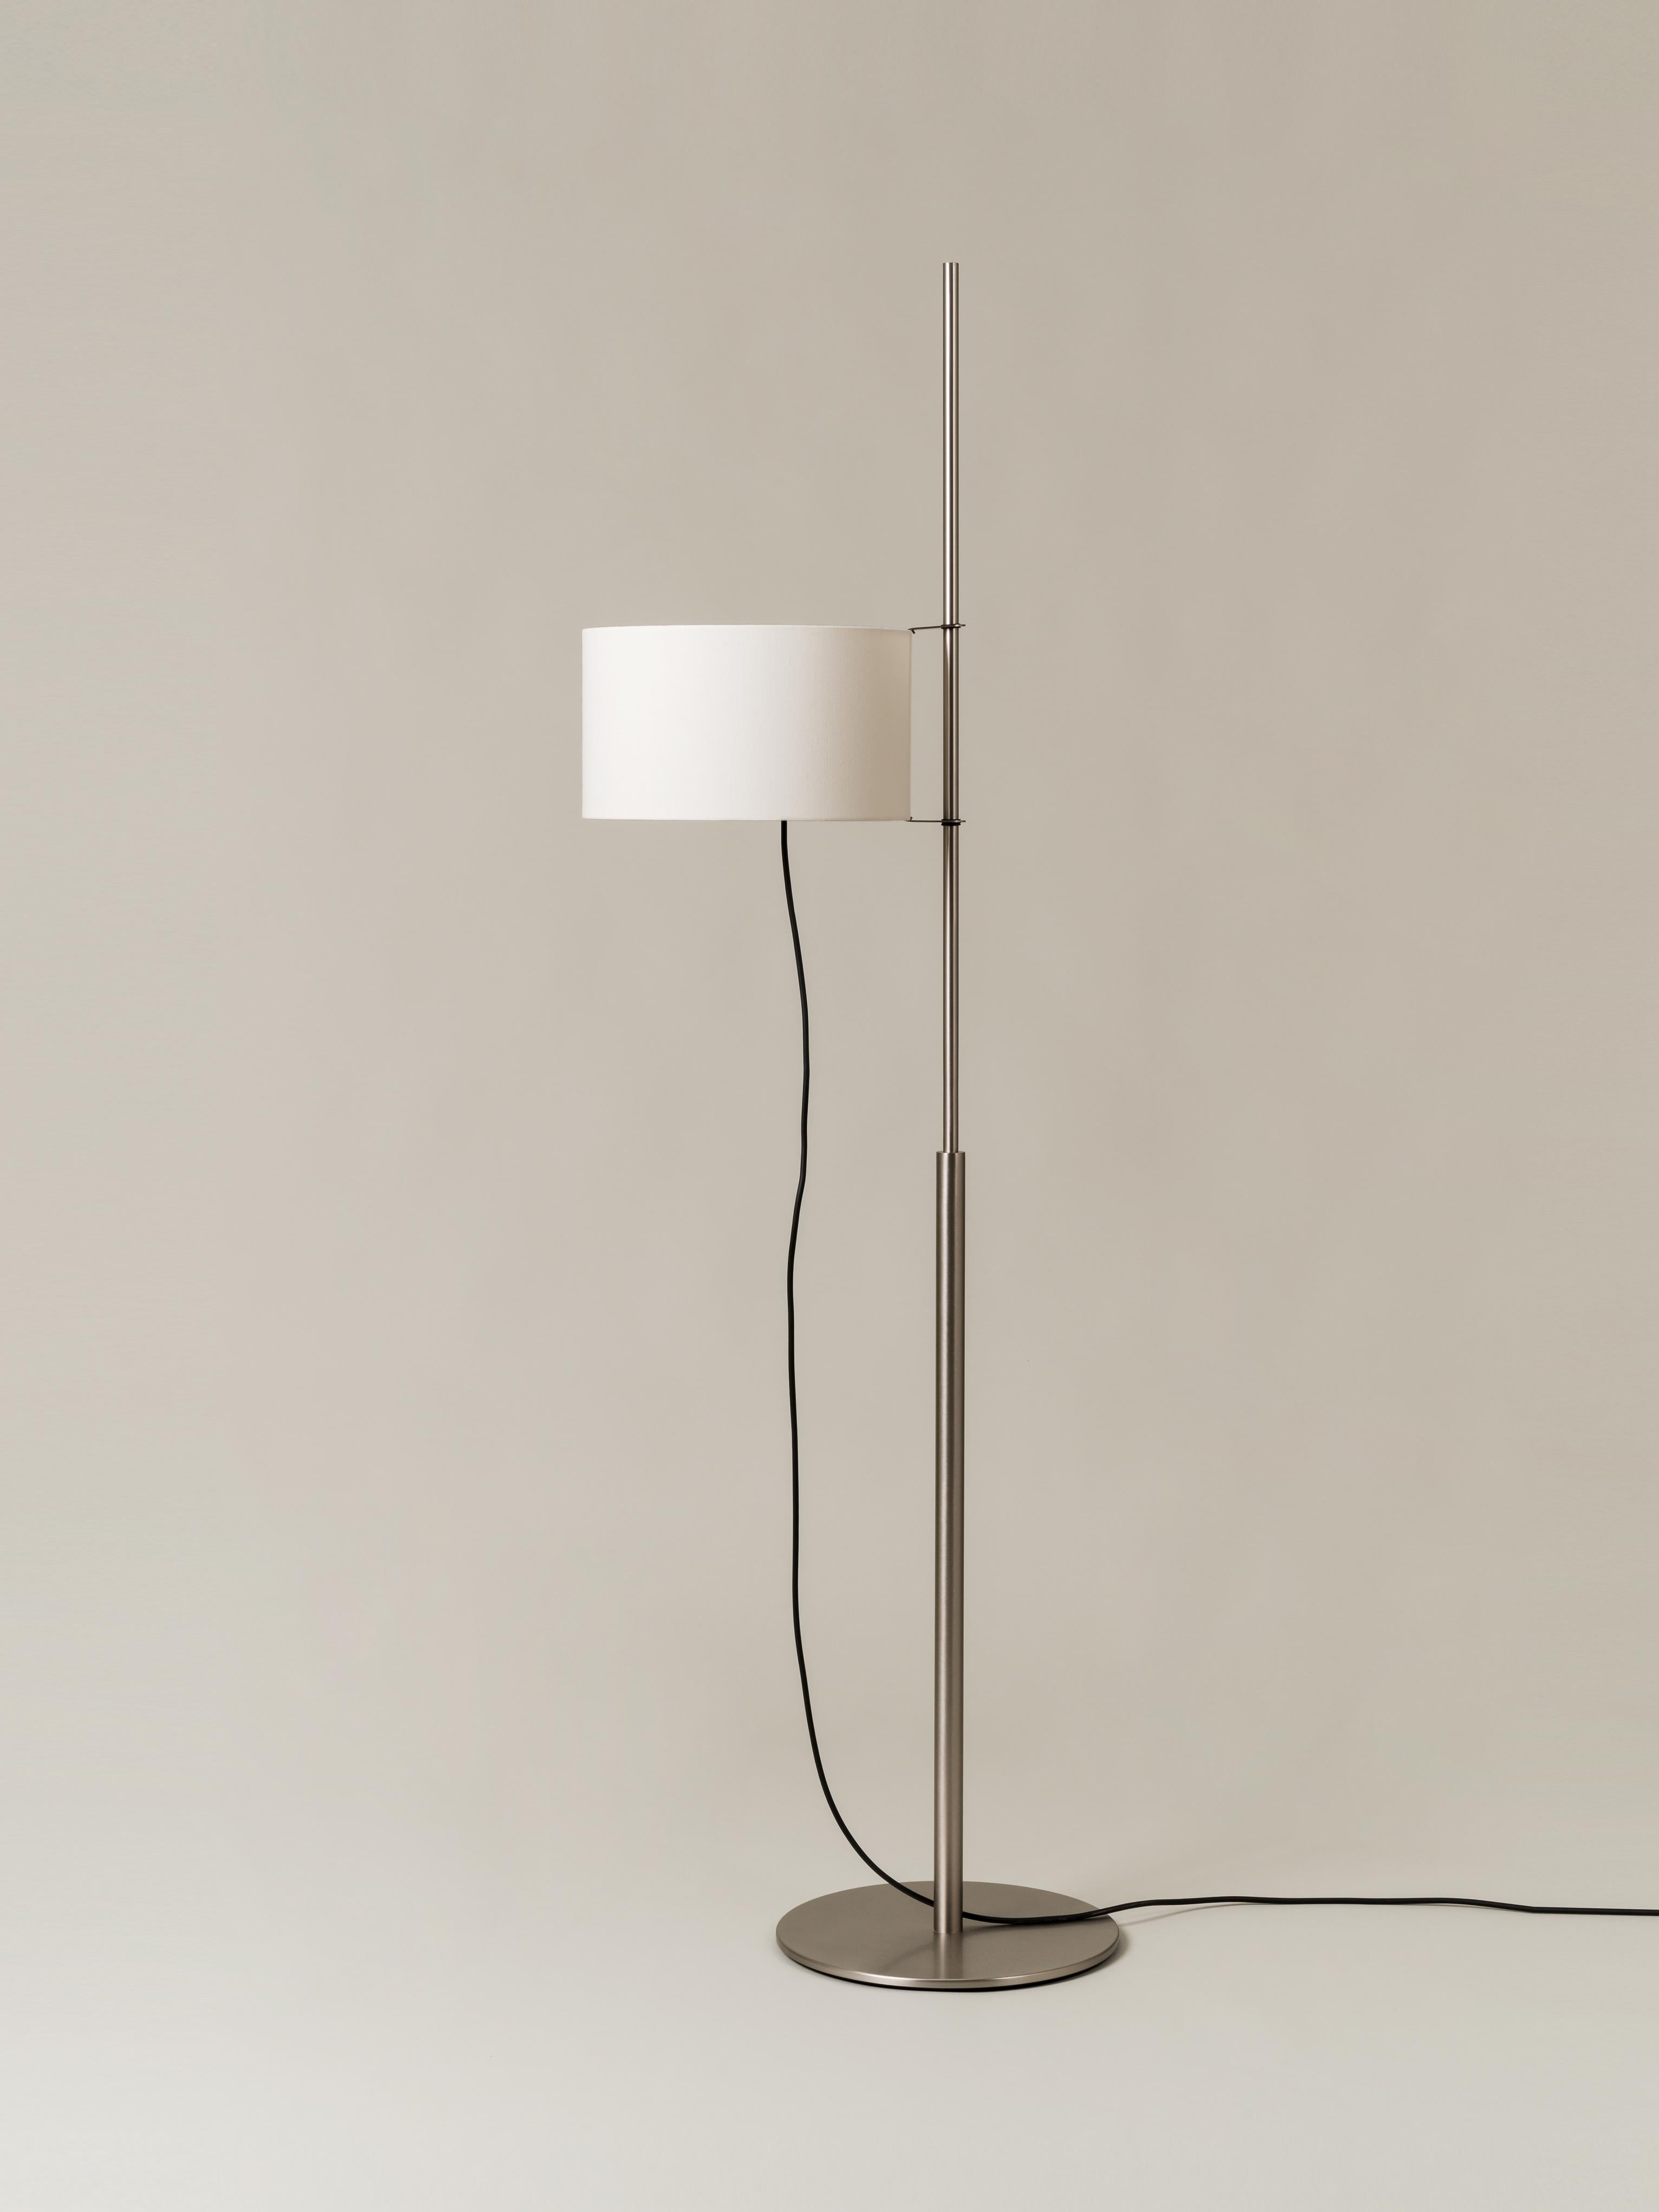 TMD floor lamp by Miguel Milá
Dimensions: D 33 x W 55 x H 171 cm
Materials: Nickel, linen.

With a structure supported by a circular metal base, the while linen shade of the TMD lamp looks like a sail hoisted on a mast. Whether switched on or